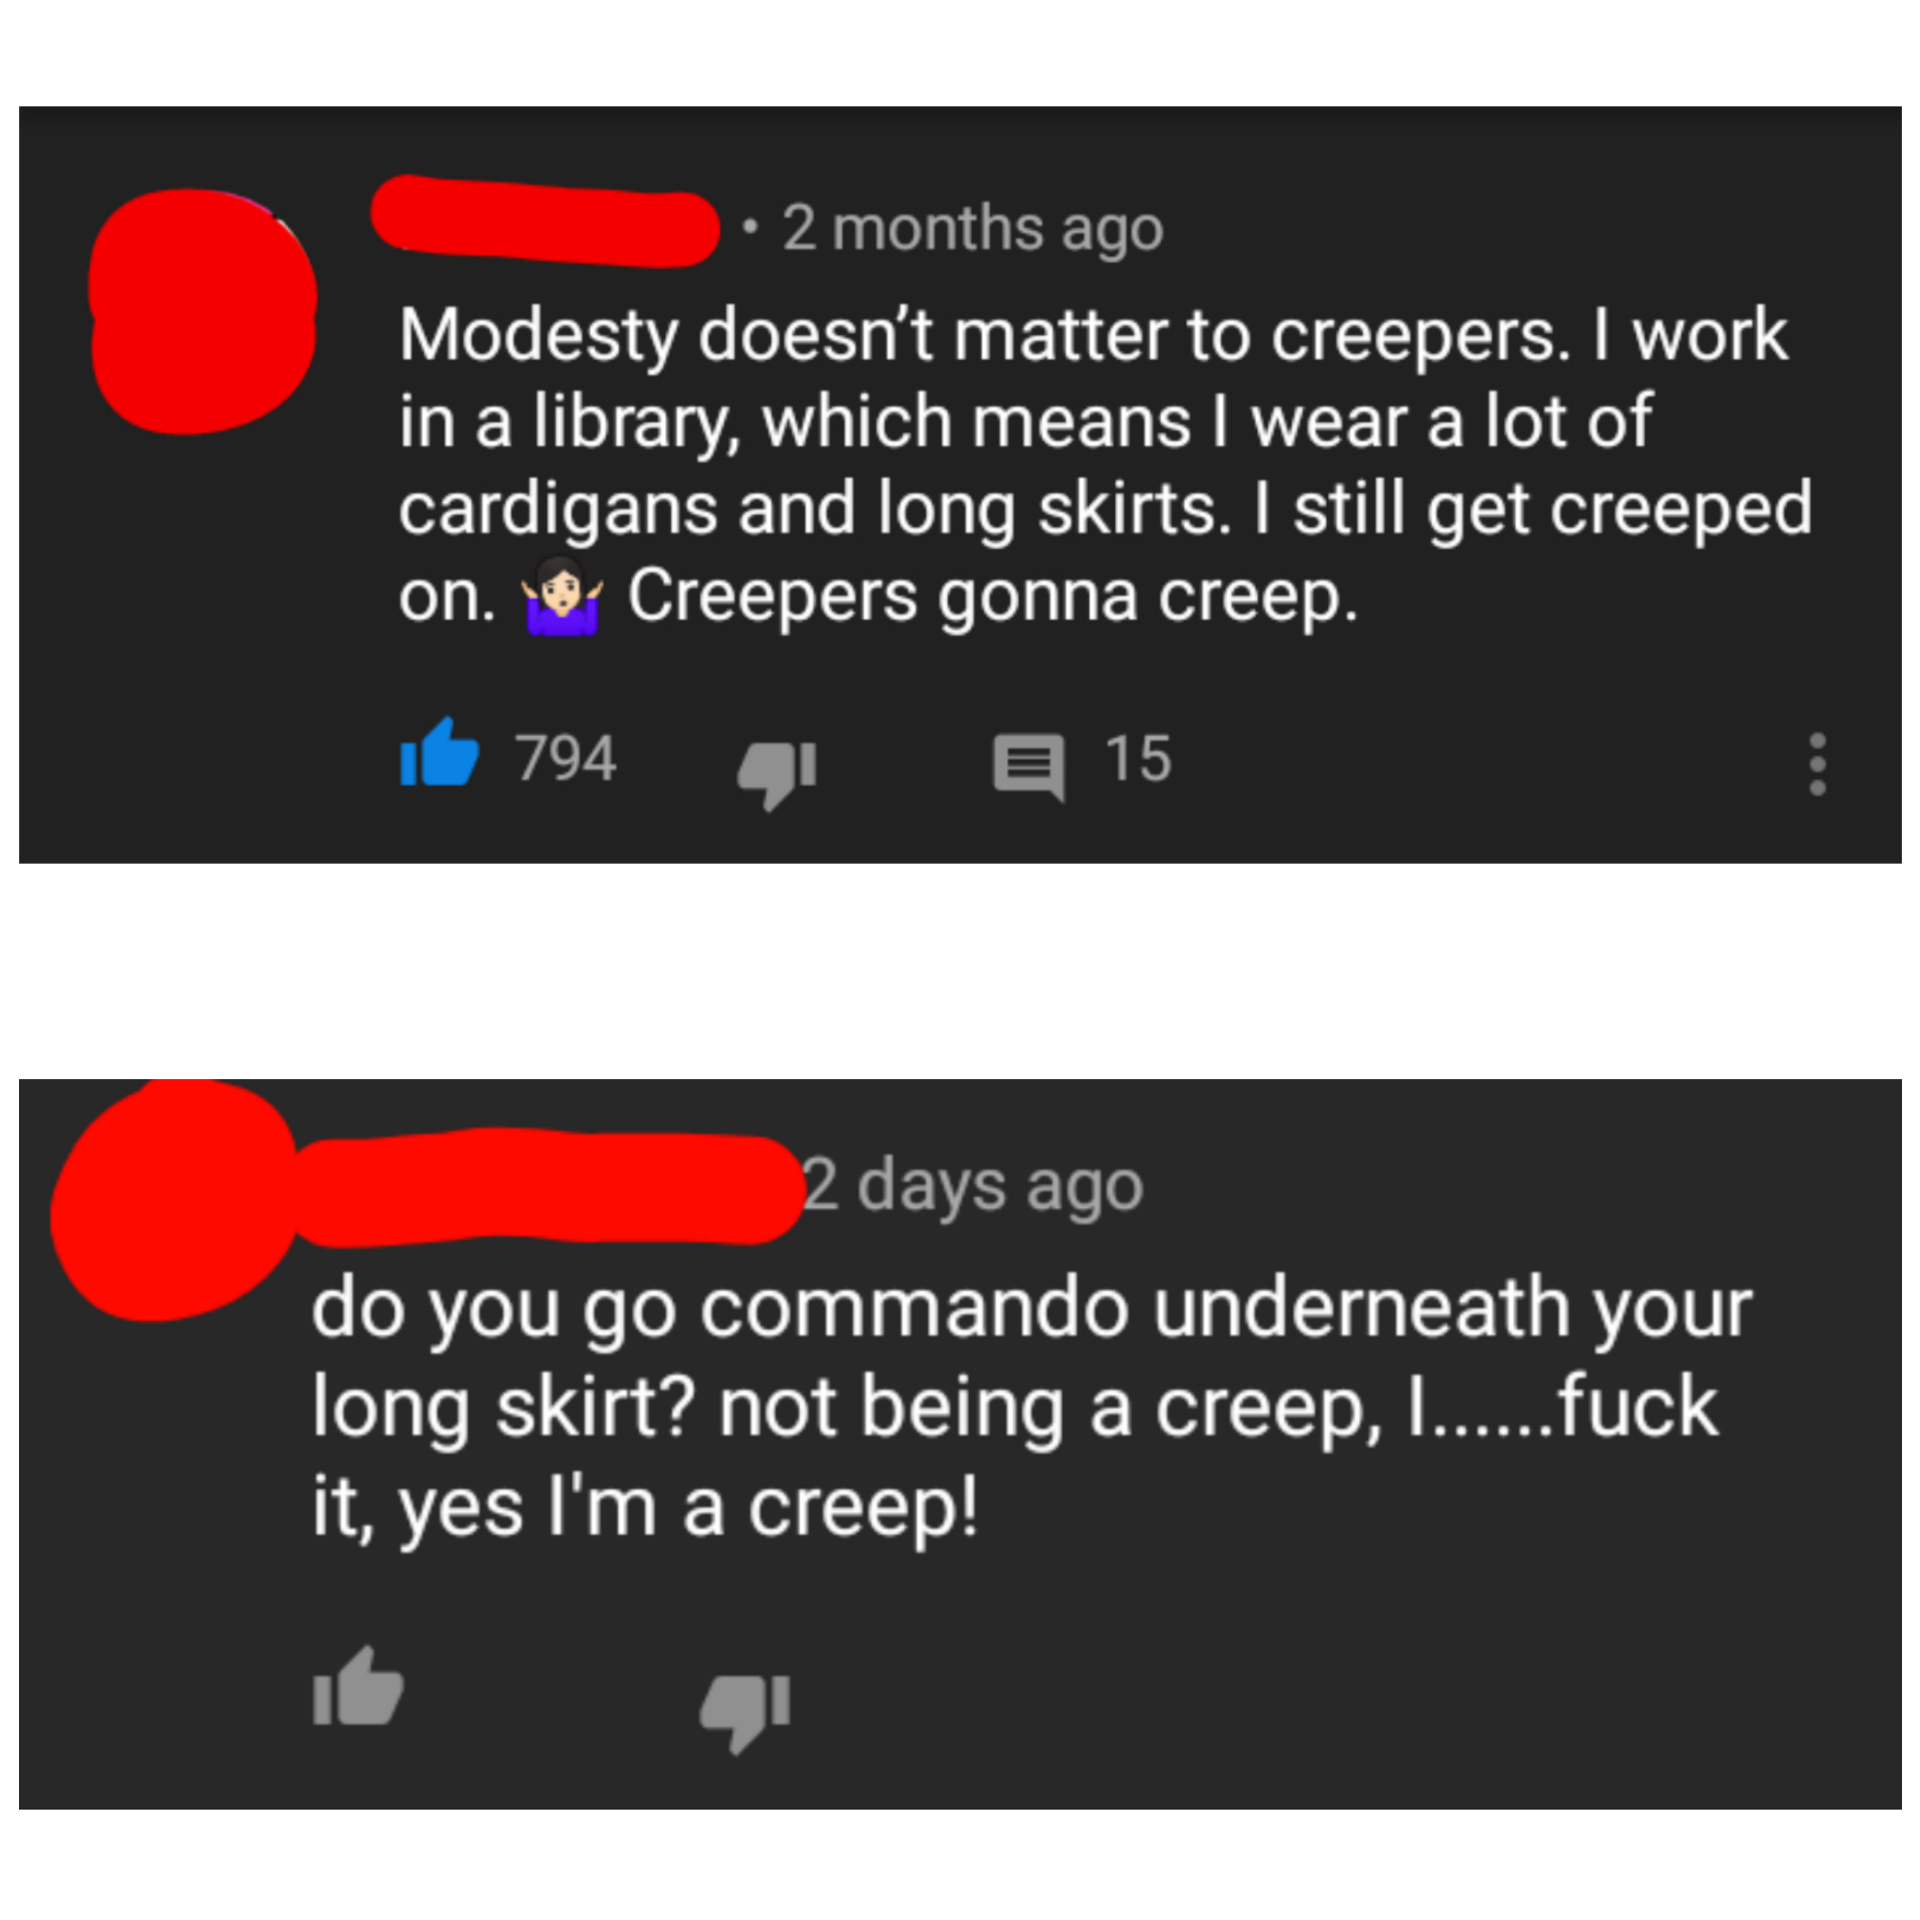 2 months ago Modesty doesn't matter to creepers. I work in a library, which means I wear a lot of cardigans and long skirts. I still get creeped on. Creepers gonna creep. il 794 15 2 days ago do you go commando underneath your long skirt? not